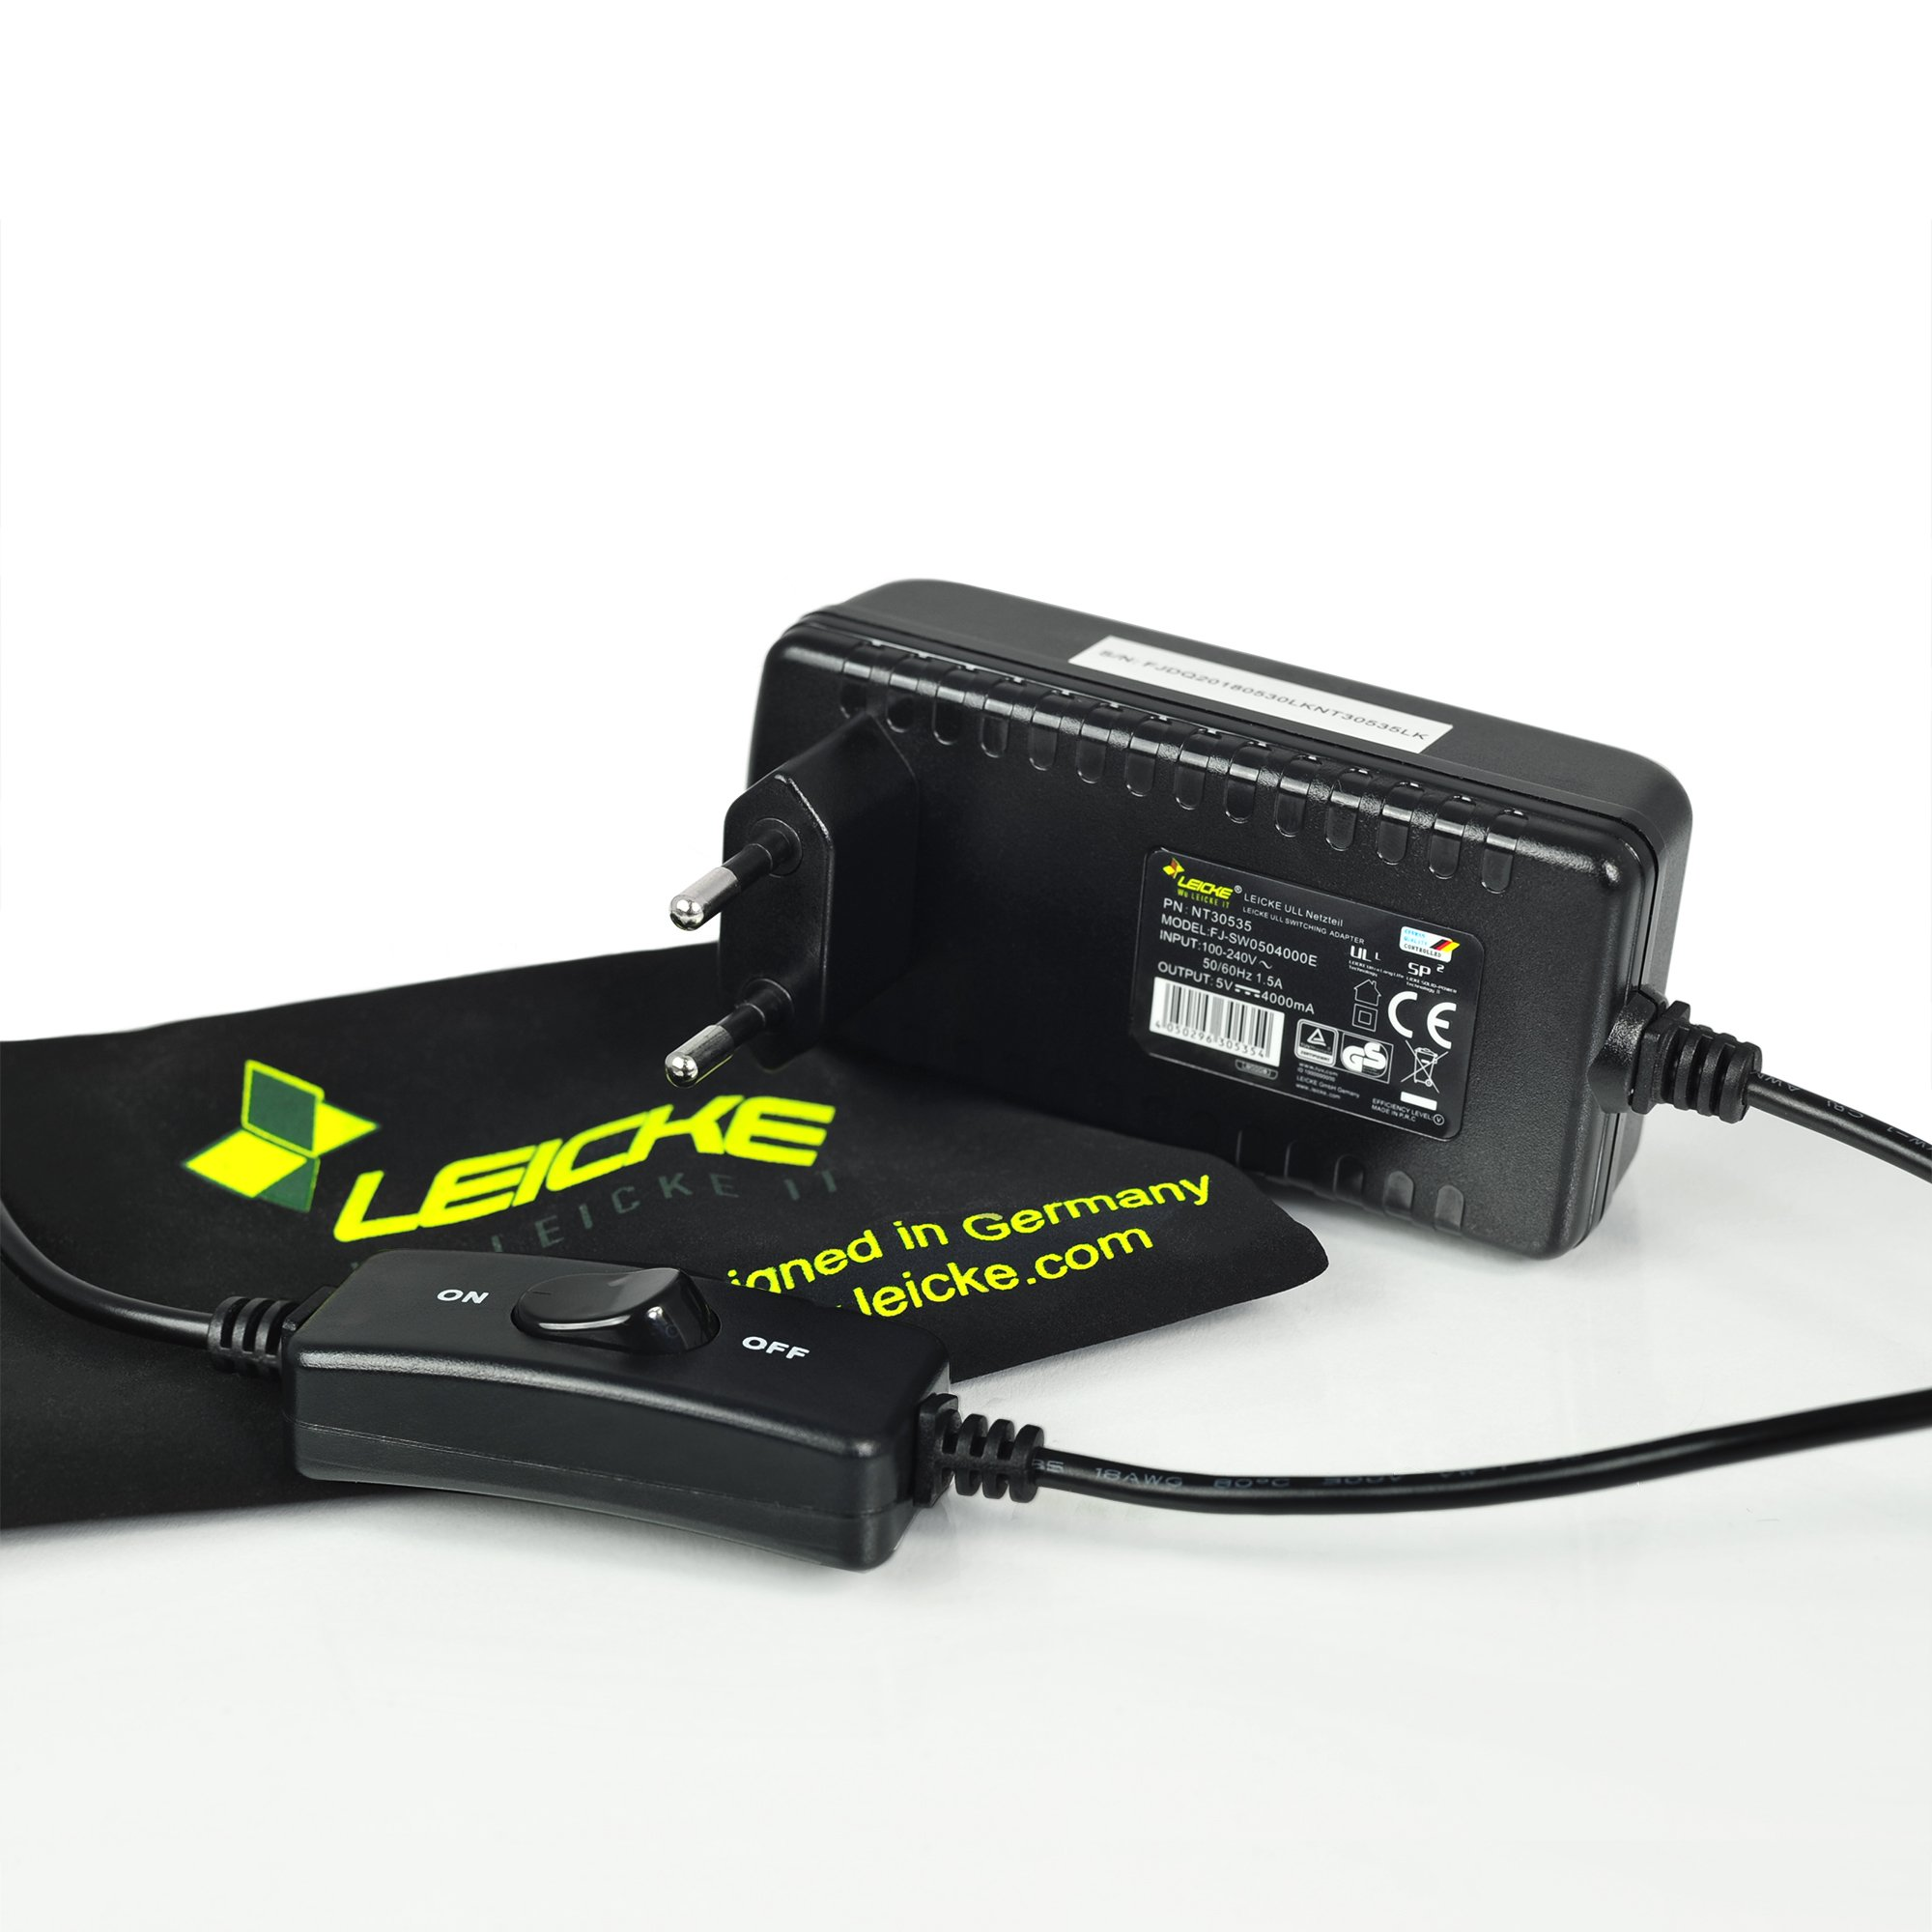 LEICKE Netzteil Mit 5V USB 4A Micro 20W Netzteil,Charger Power-Switch,